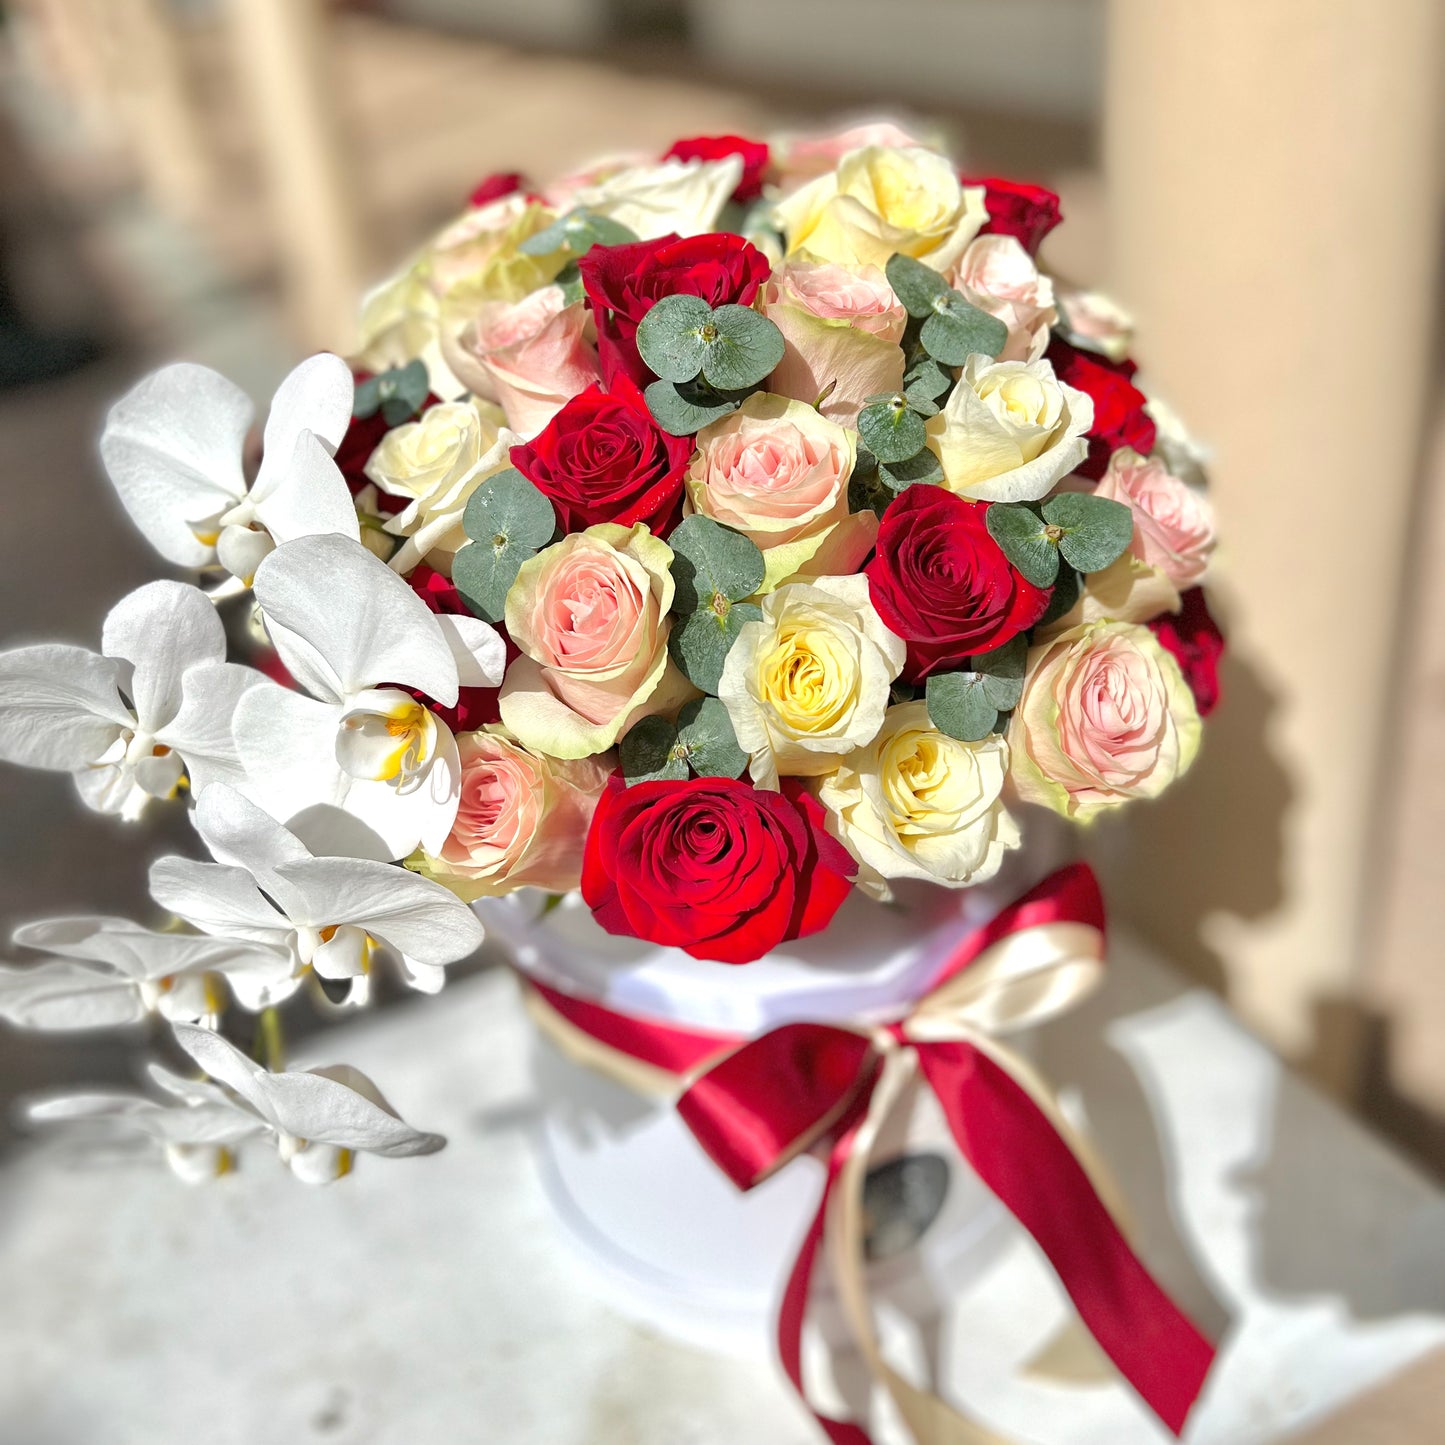 Potrait of red yellow roses on bench with red and white ribbon